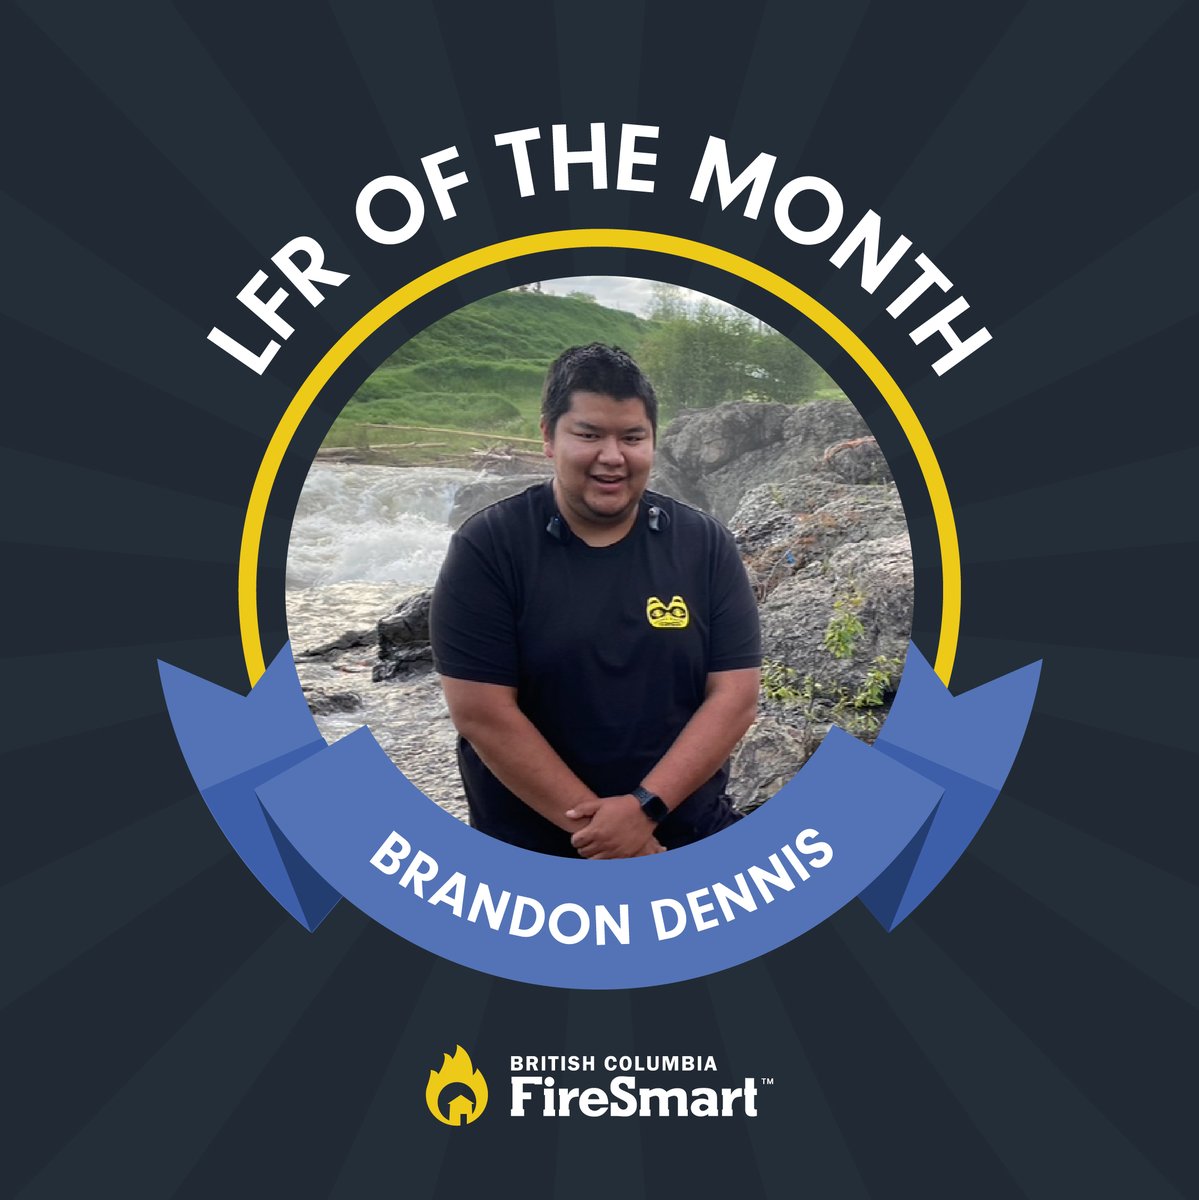 Brandon Dennis is our LFR (Local FireSmart Representative) of the month! As the FireSmart Coordinator for Witset First Nation, he became an LFR to further support his community. Keep up the great work, Brandon! Learn more about Brandon: tinyurl.com/mryd7tv5